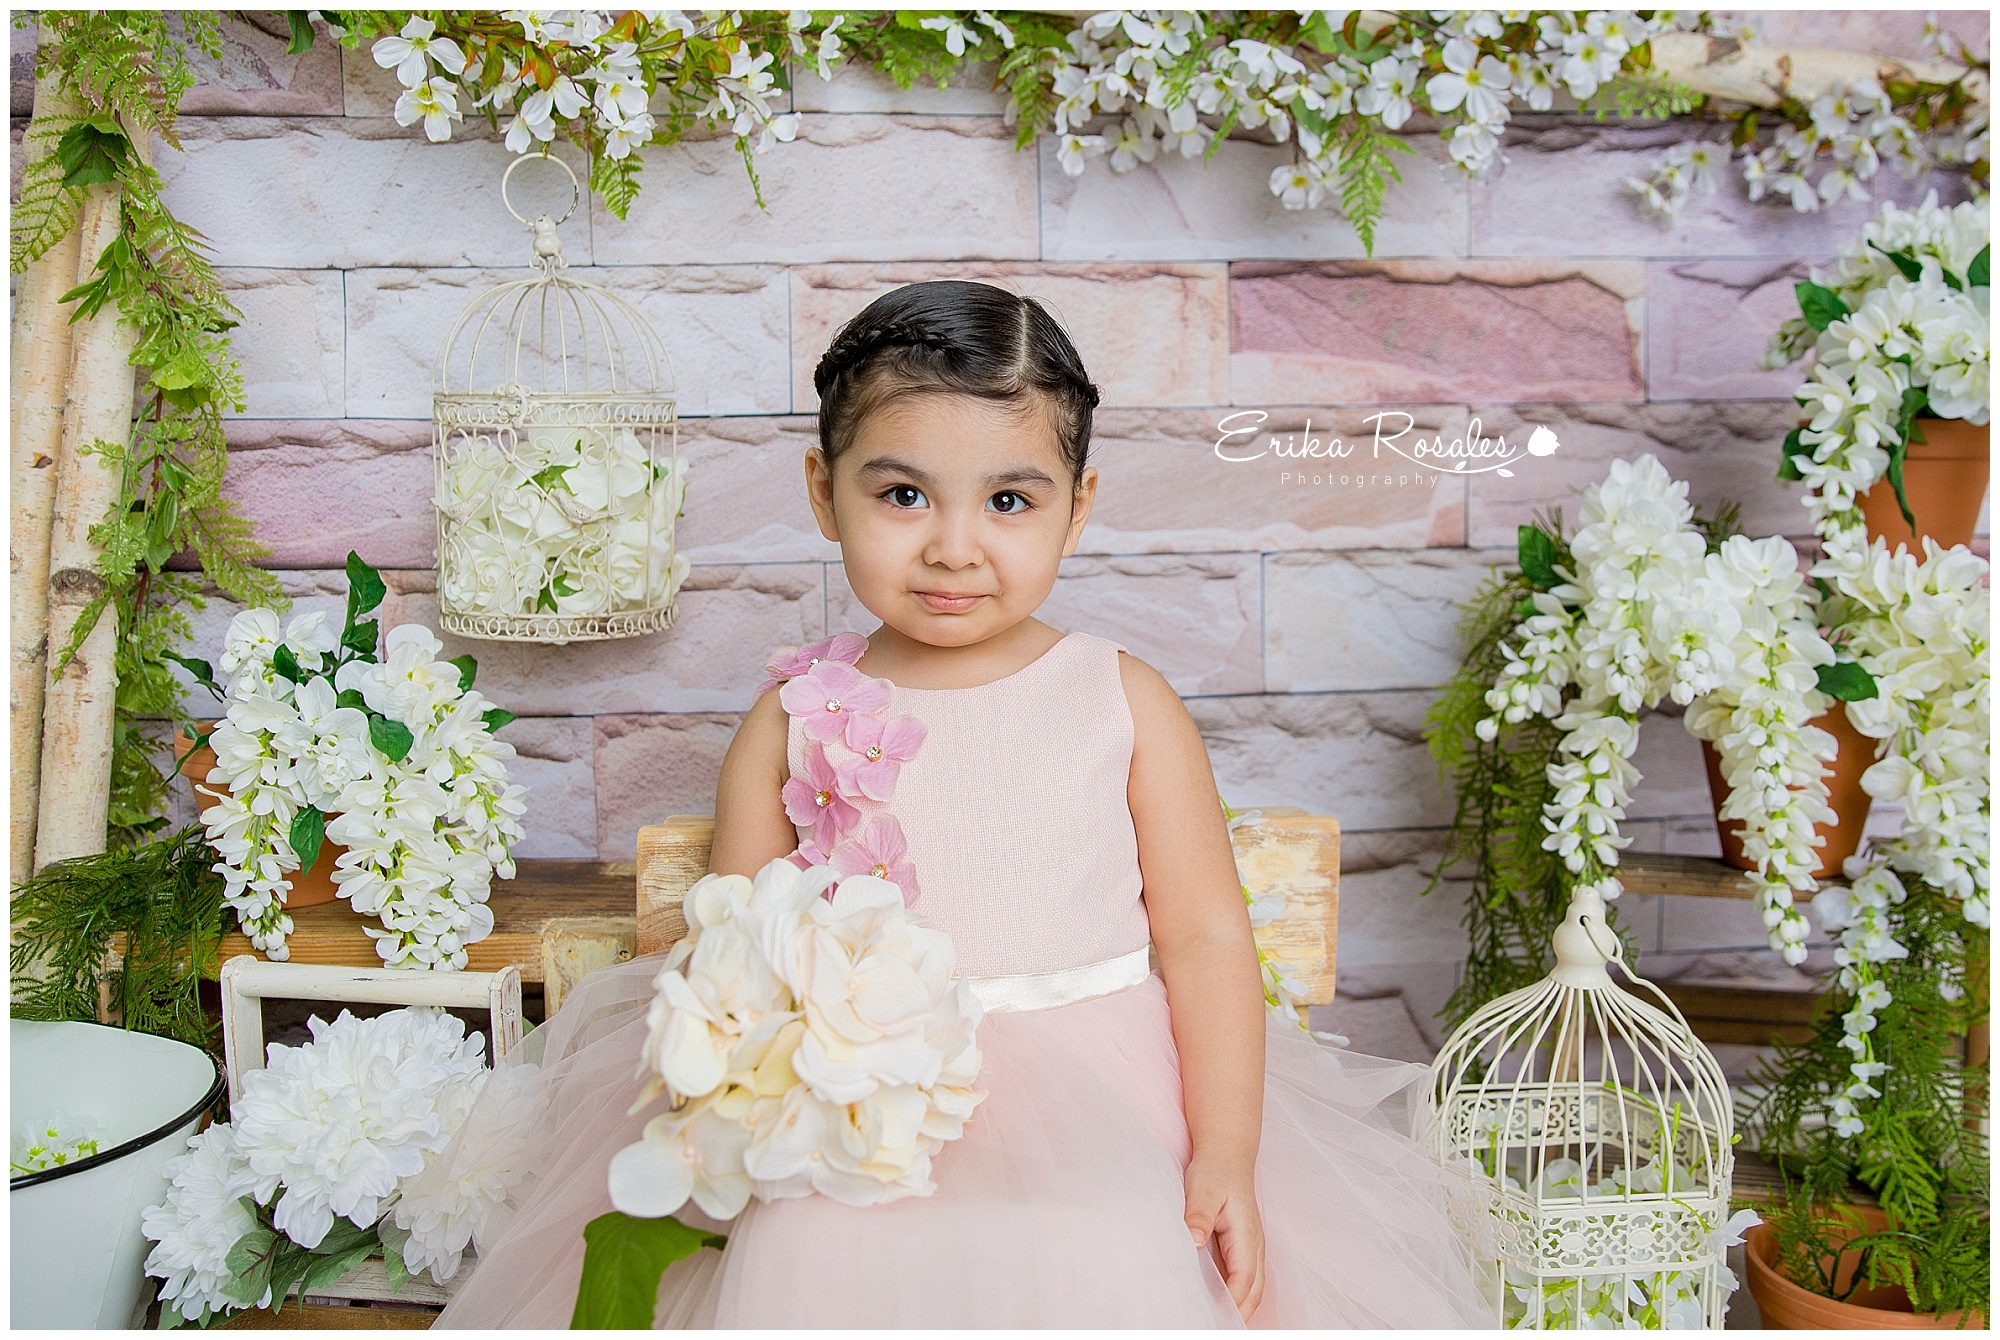 Children Photo Session Floral theme- The Bronx NY Maternity, Pregnancy ...